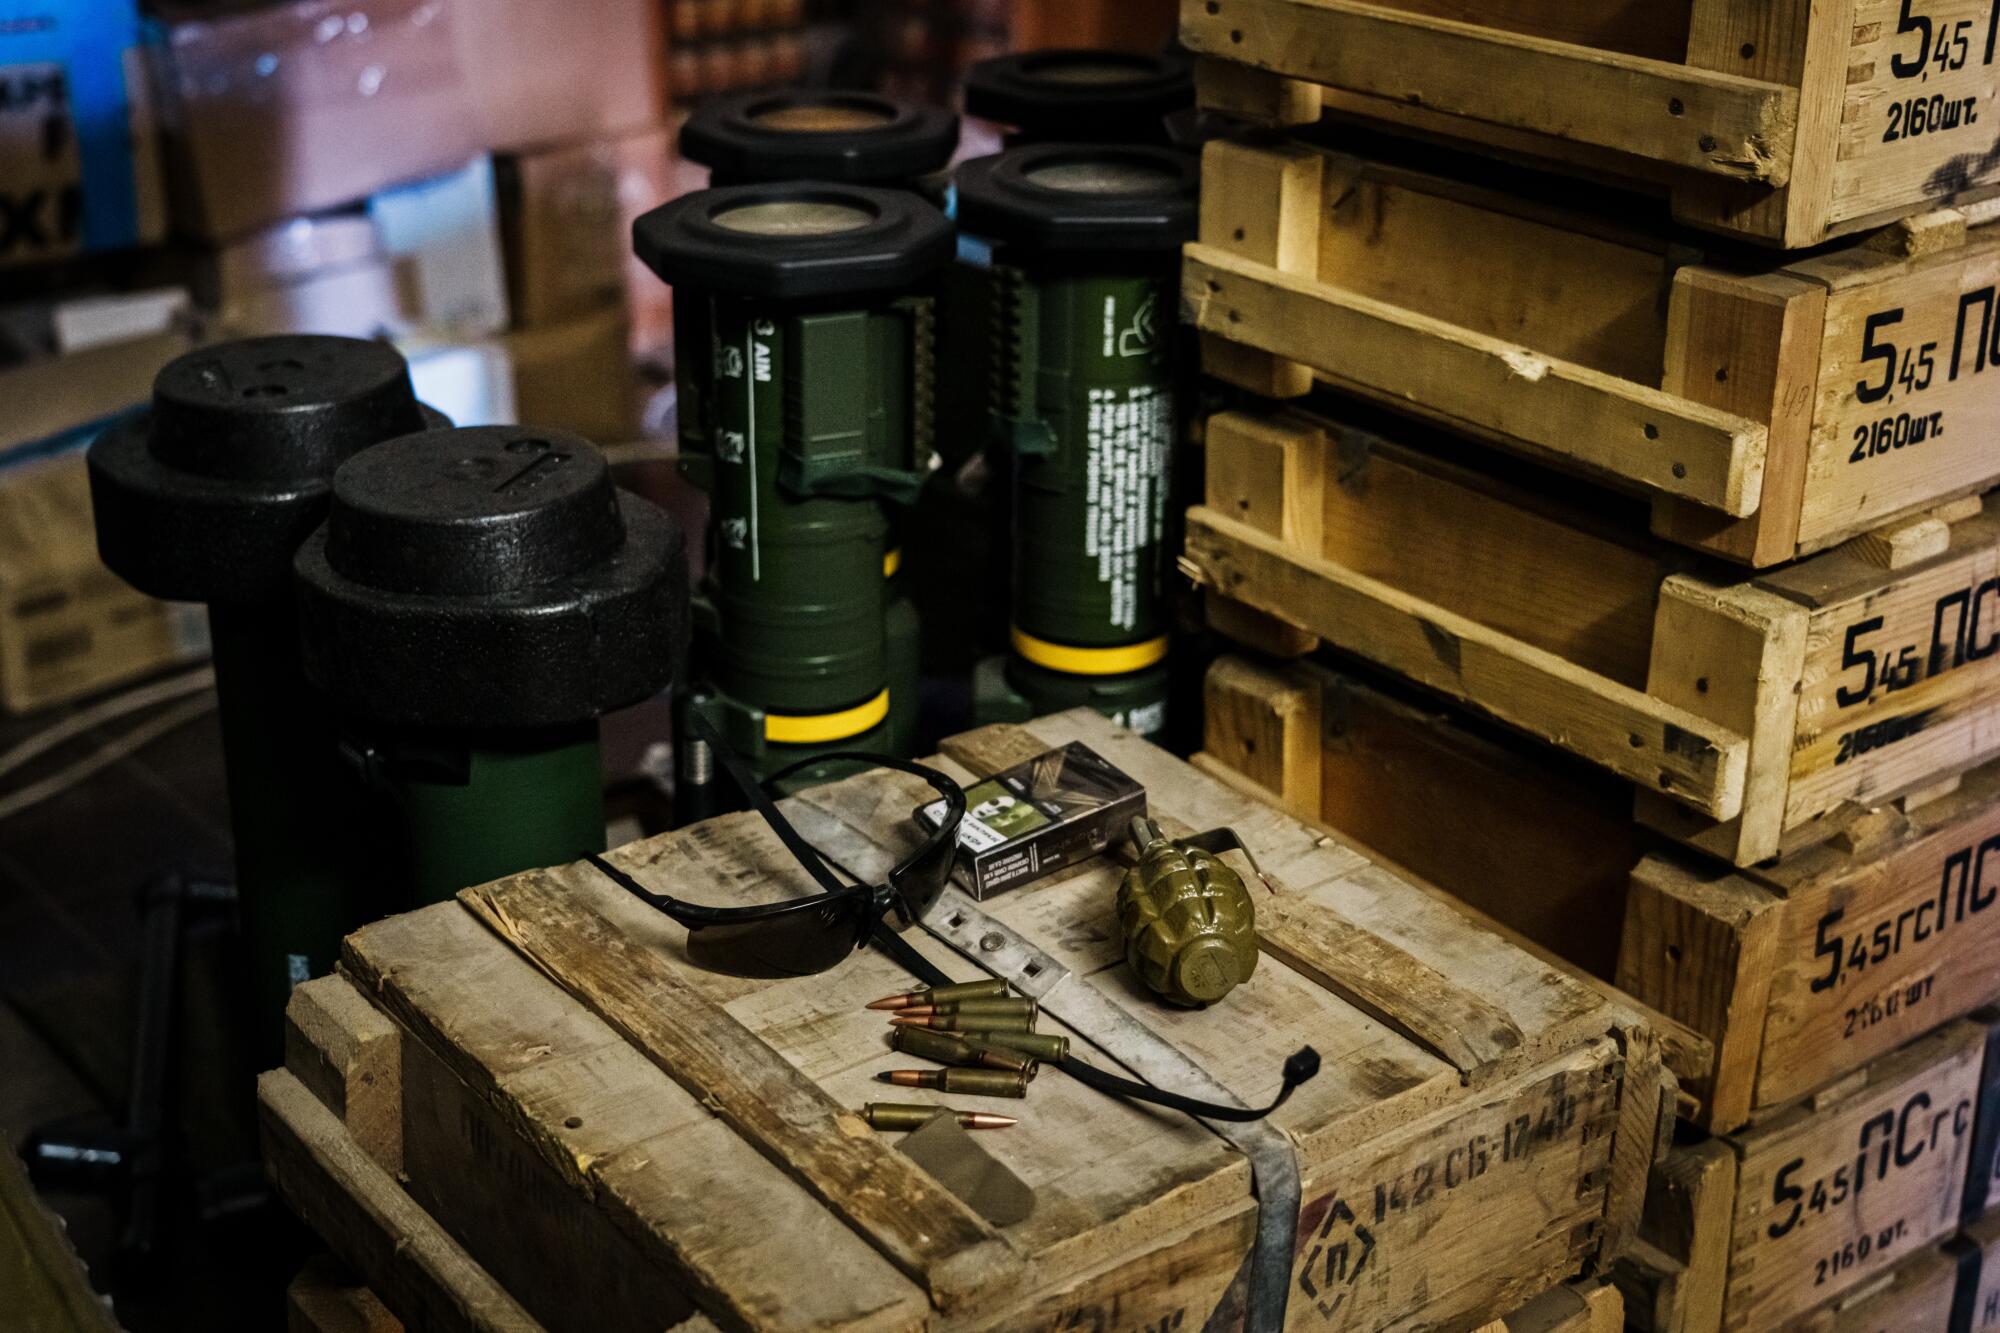 Supply crates sit in a depot at a makeshift military outpost in Lysychansk, Ukraine.